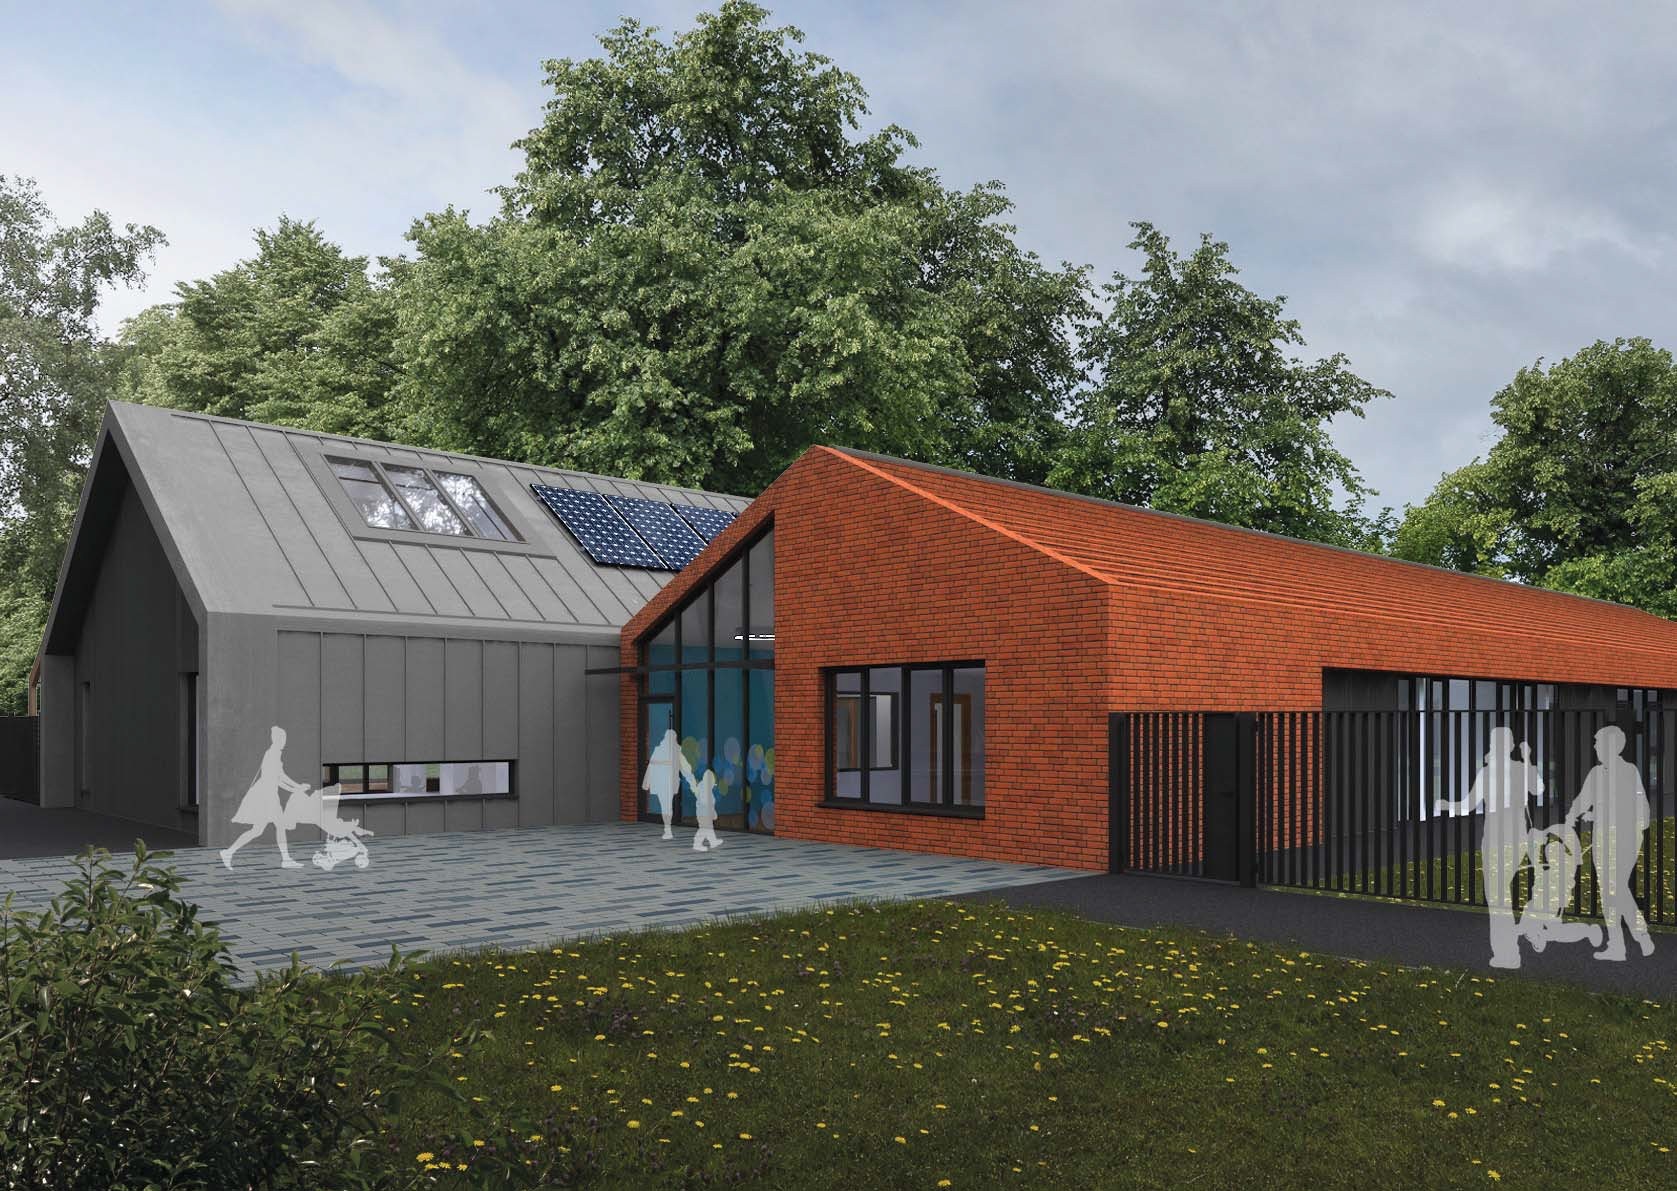 Plans lodged for two new nurseries in Glasgow